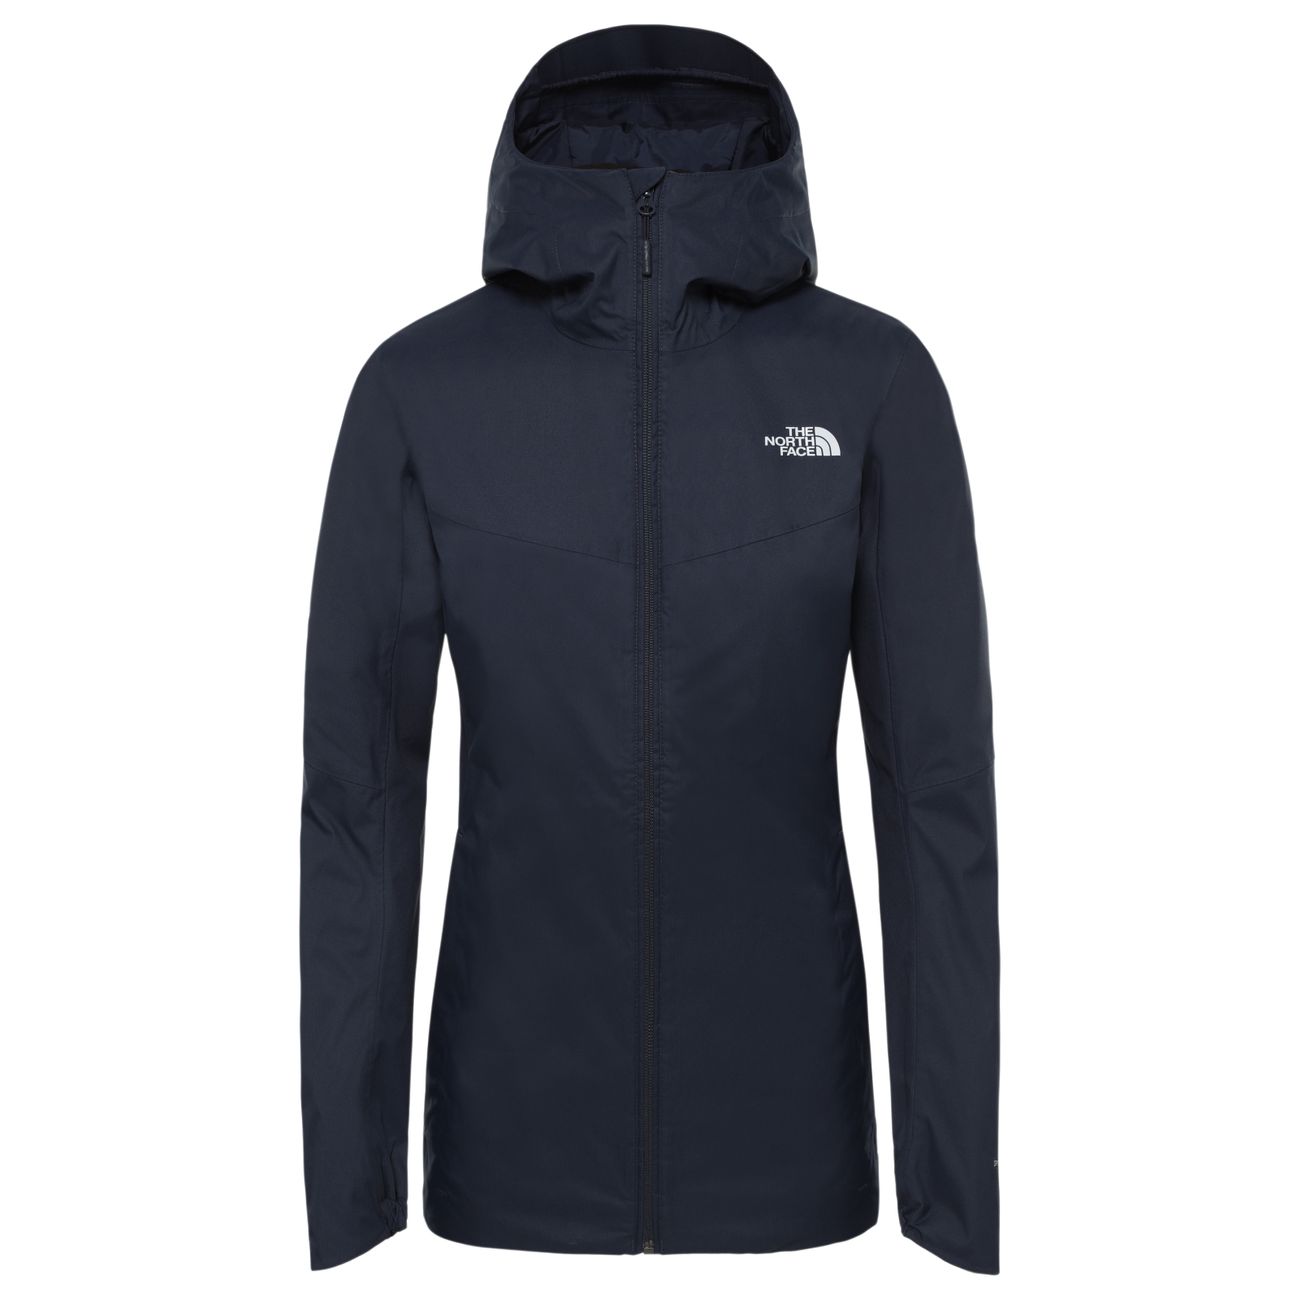 THE NORTH FACE W QUEST INSULATED JACKET Damen Thermojacke